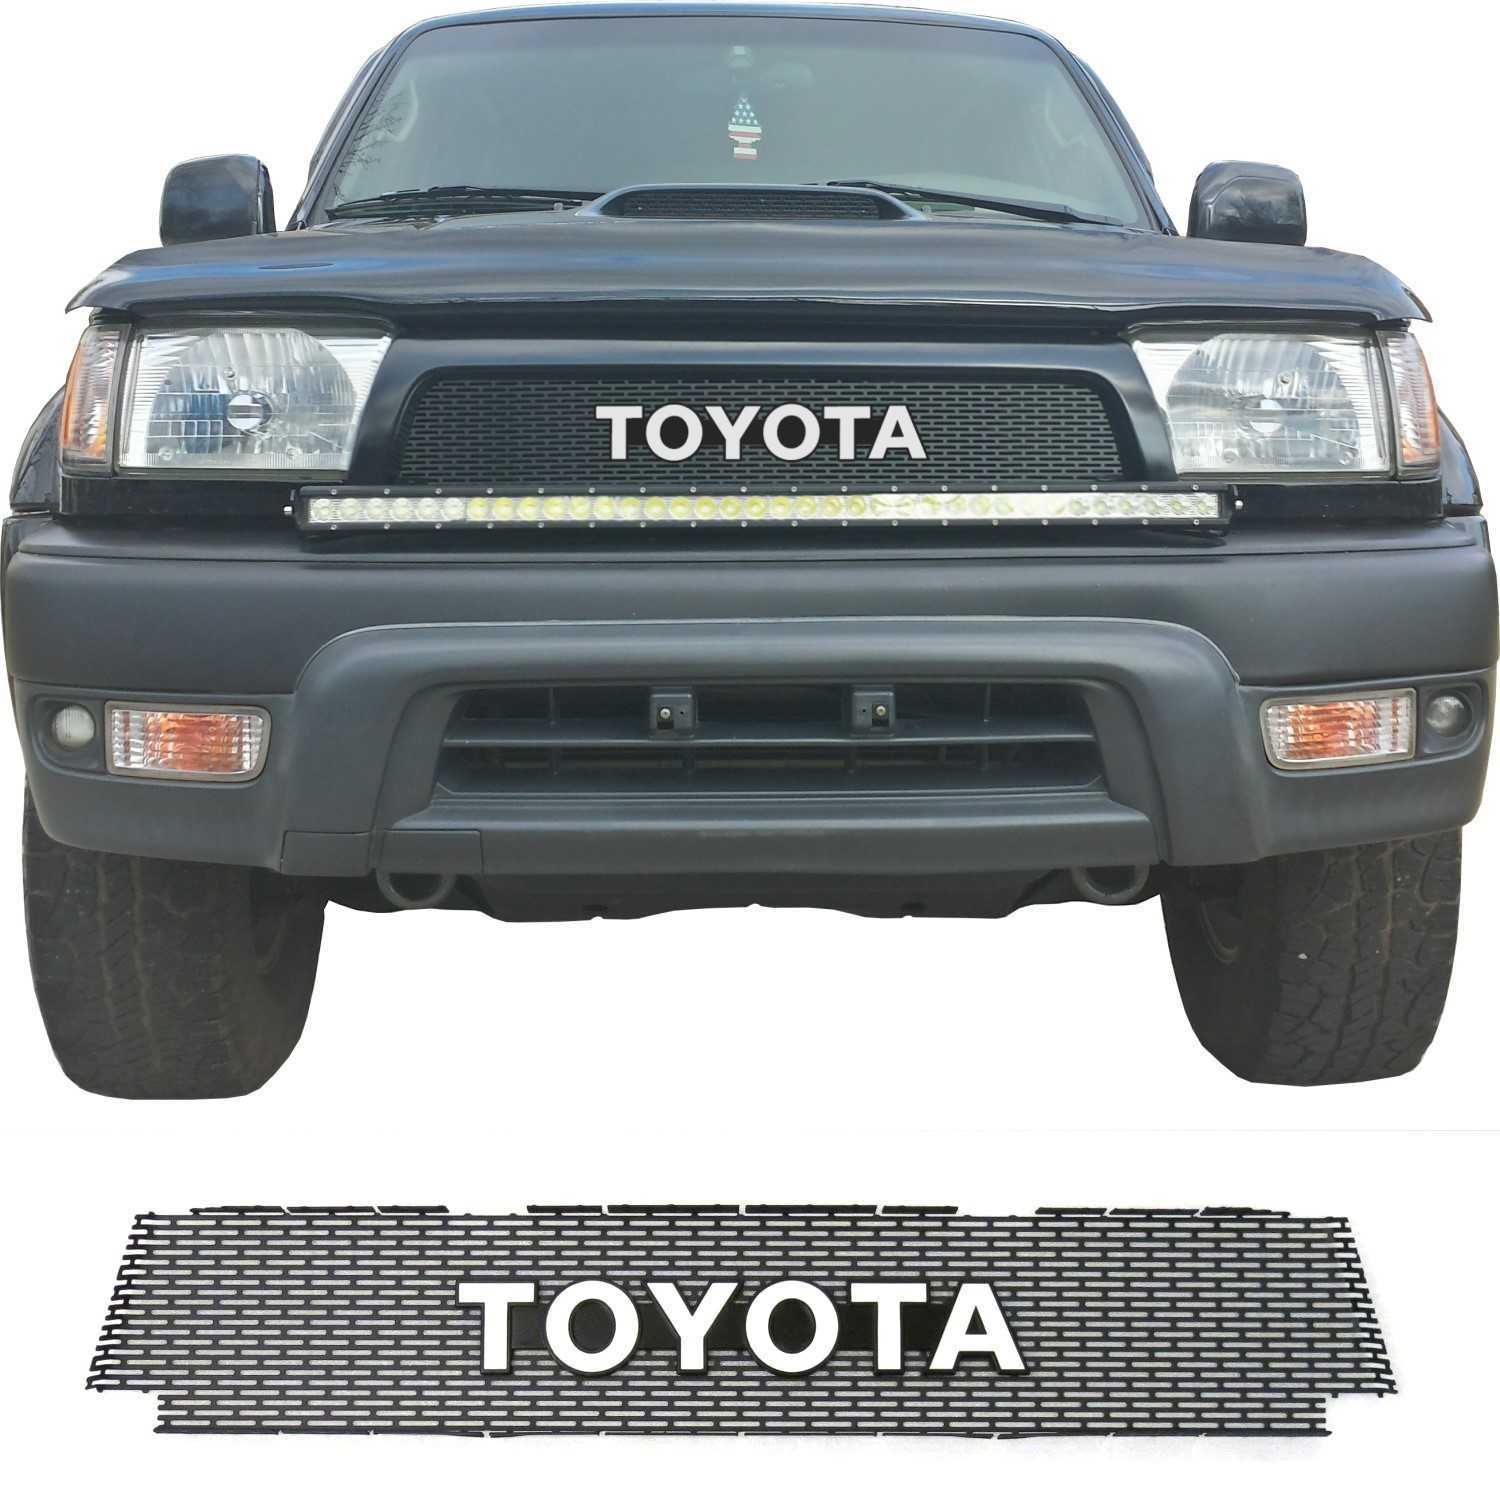 1996-98 (and 99-02*) Toyota 4Runner Grill Mesh With Toyota Emblem